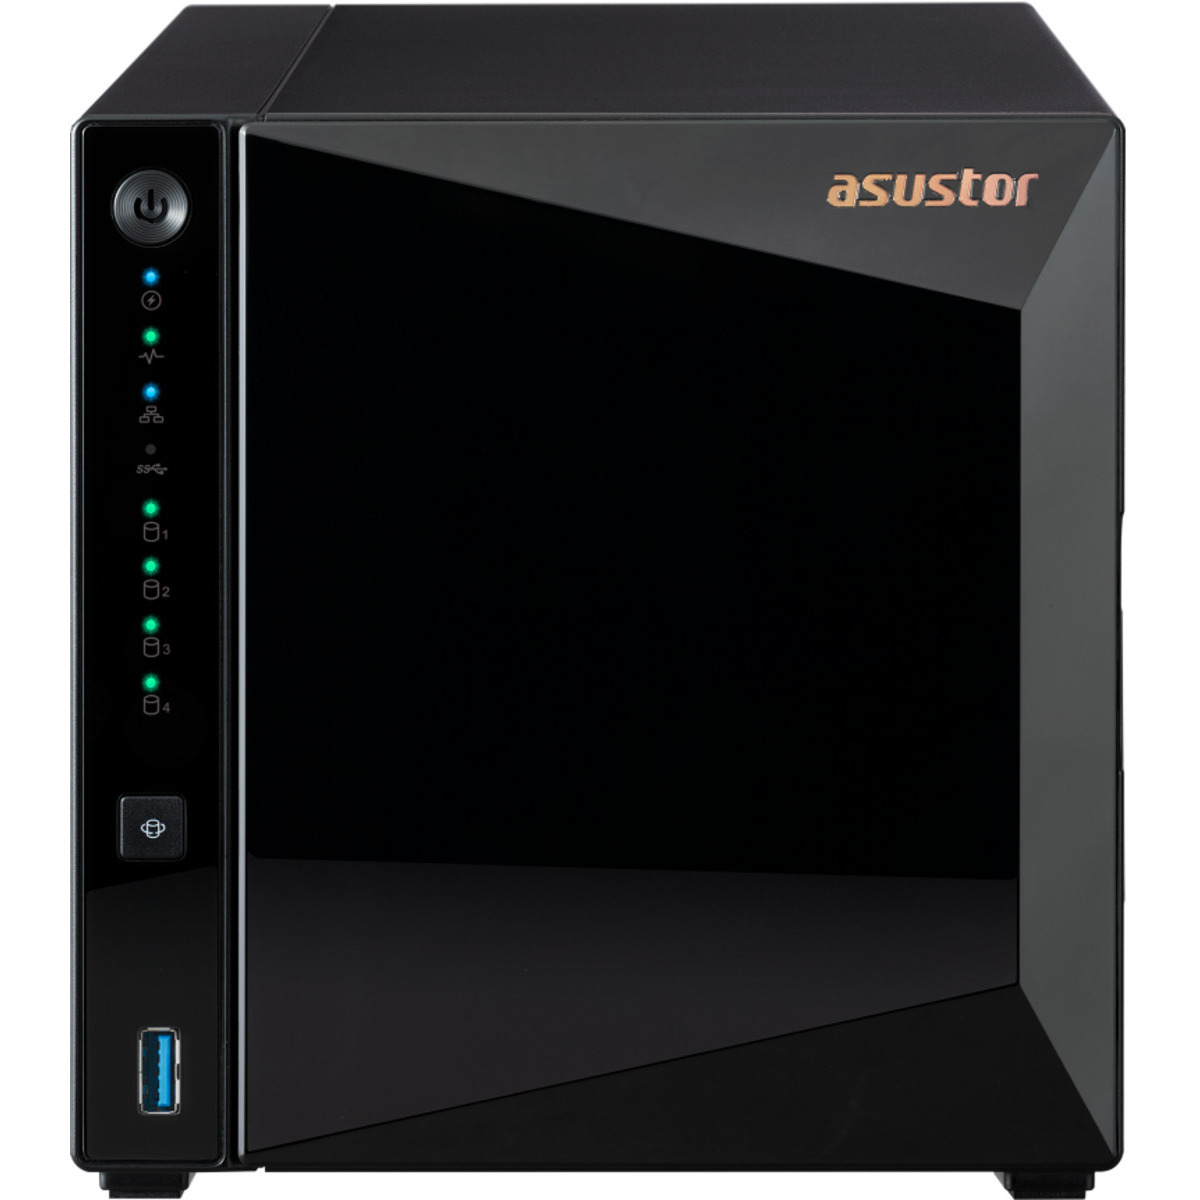 ASUSTOR DRIVESTOR 4 Pro Gen2 AS3304T v2 56tb 4-Bay Desktop Personal / Basic Home / Small Office NAS - Network Attached Storage Device 4x14tb Seagate IronWolf Pro ST14000NT001 3.5 7200rpm SATA 6Gb/s HDD NAS Class Drives Installed - Burn-In Tested - ON SALE DRIVESTOR 4 Pro Gen2 AS3304T v2